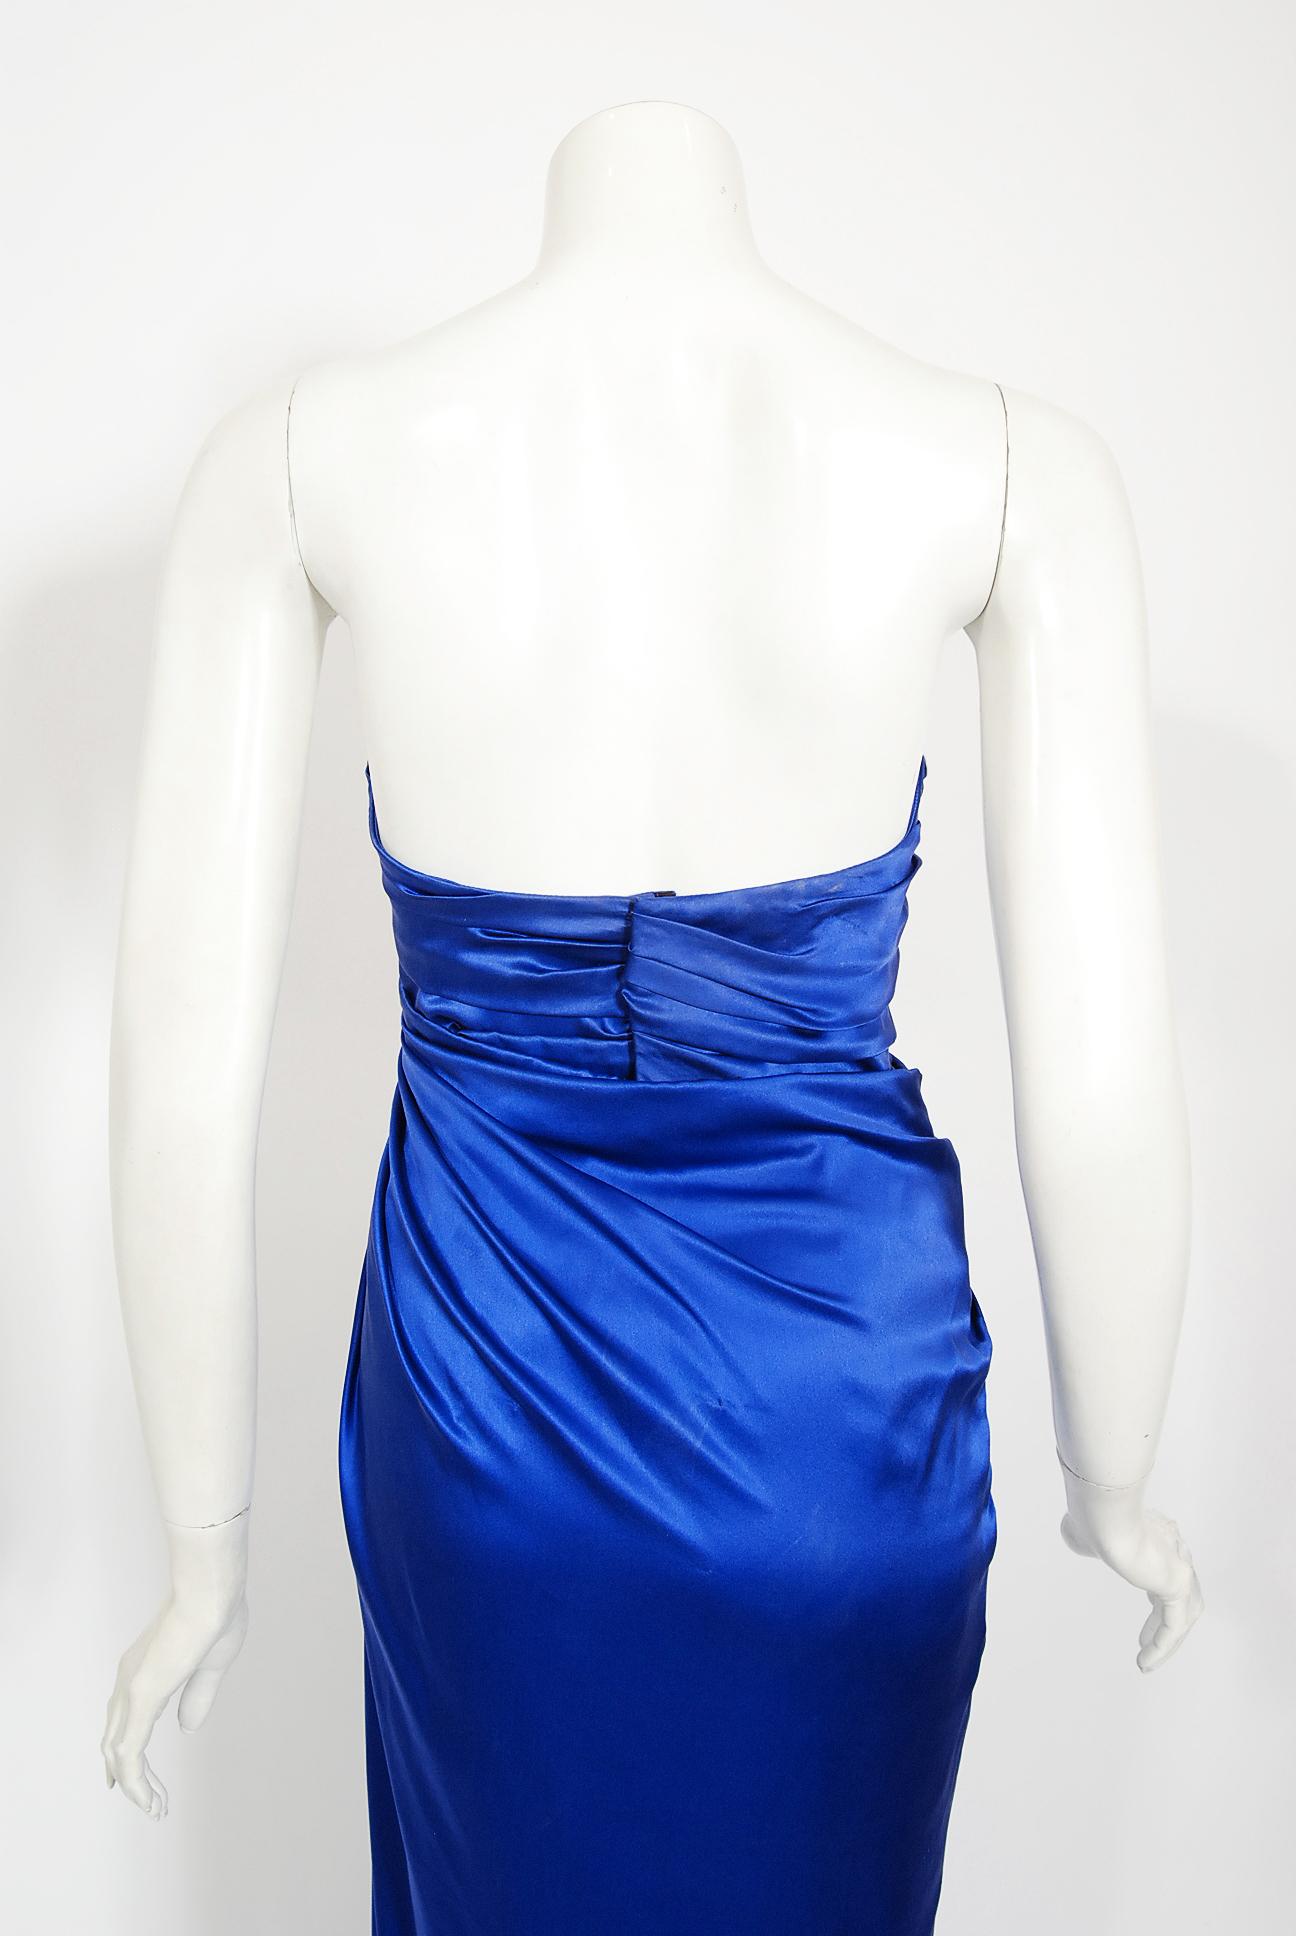 Iconic 1999 Thierry Mugler Documented Sapphire Blue Silk Corset Strapless Gown For Sale 5